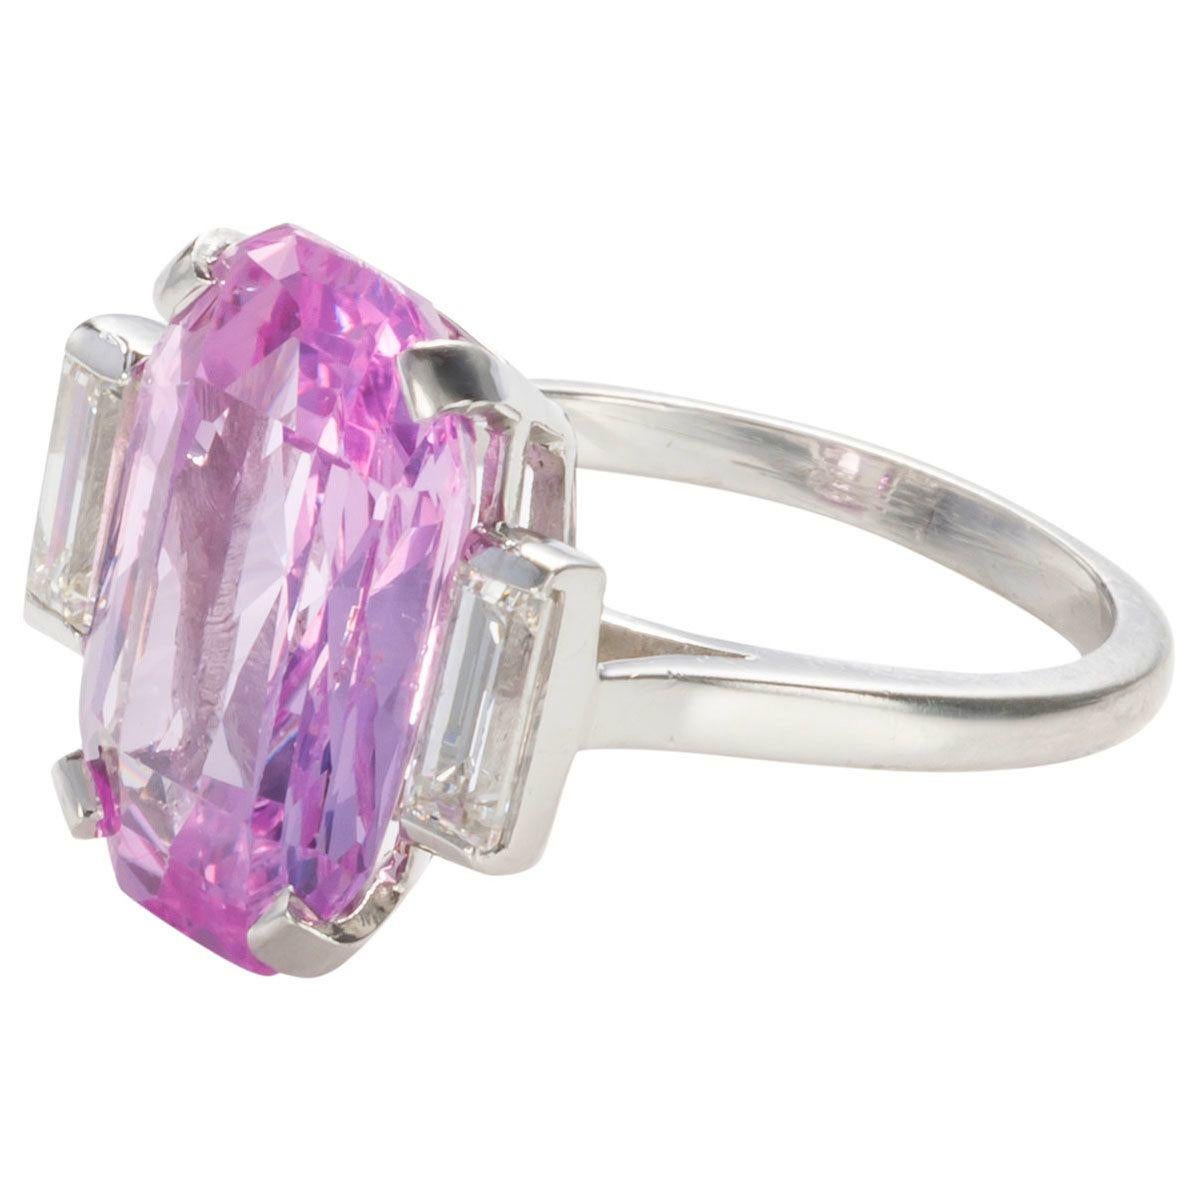 8.27 Carat Unheated Certified Pink Ceylon Sapphire and Baguette Cut Diamond Ring For Sale 1